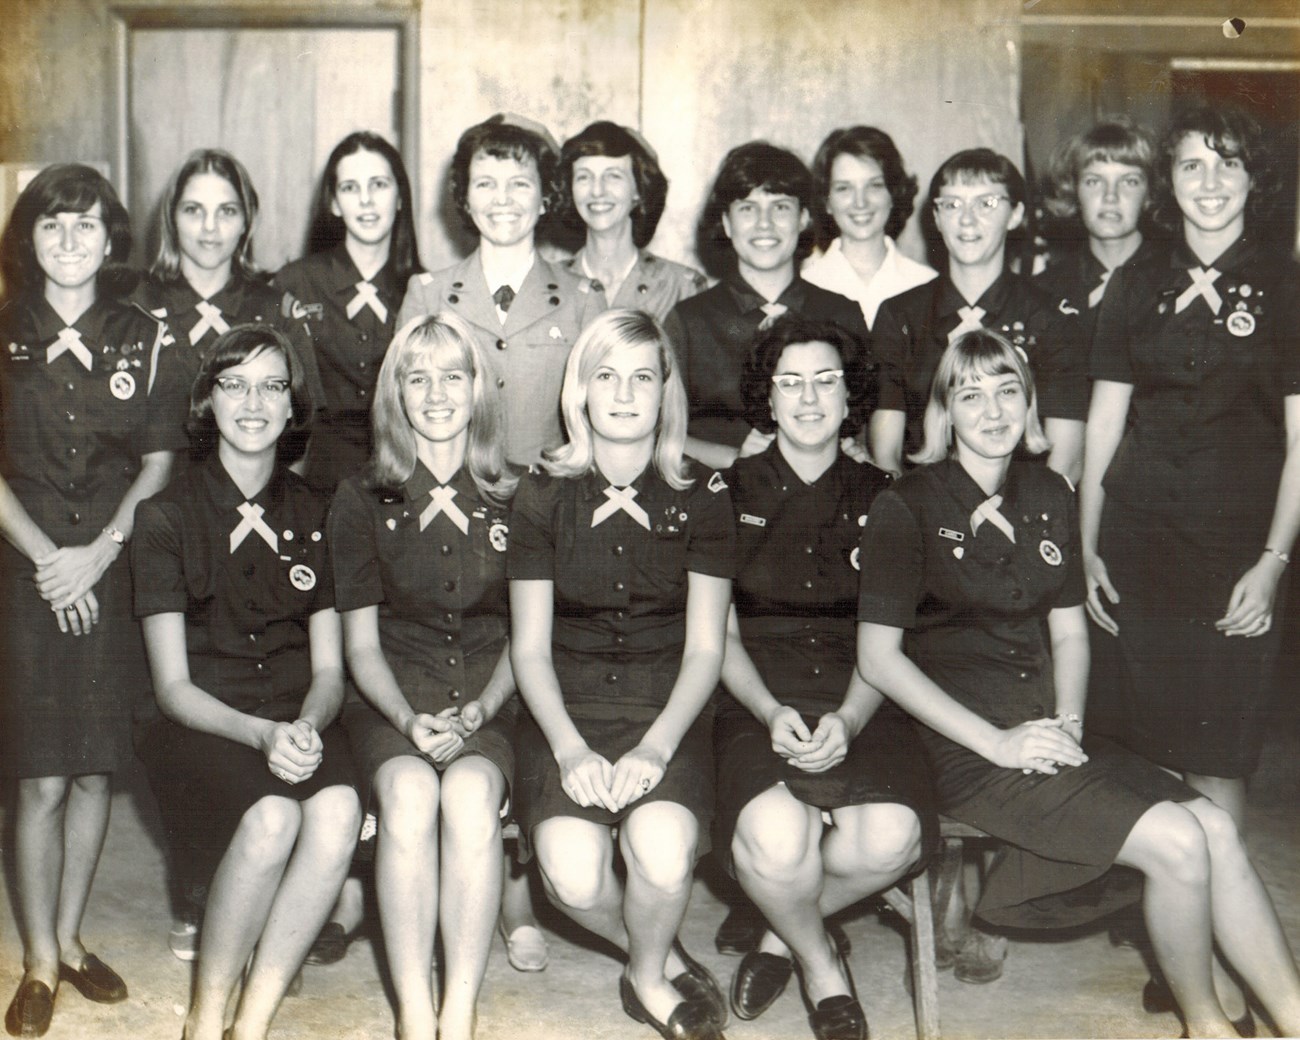 Thirteen girls and two troop leaders pose in their Girl Scout uniforms of skirt, shirt, and cross tie. Only the leaders wear hats and jackets.